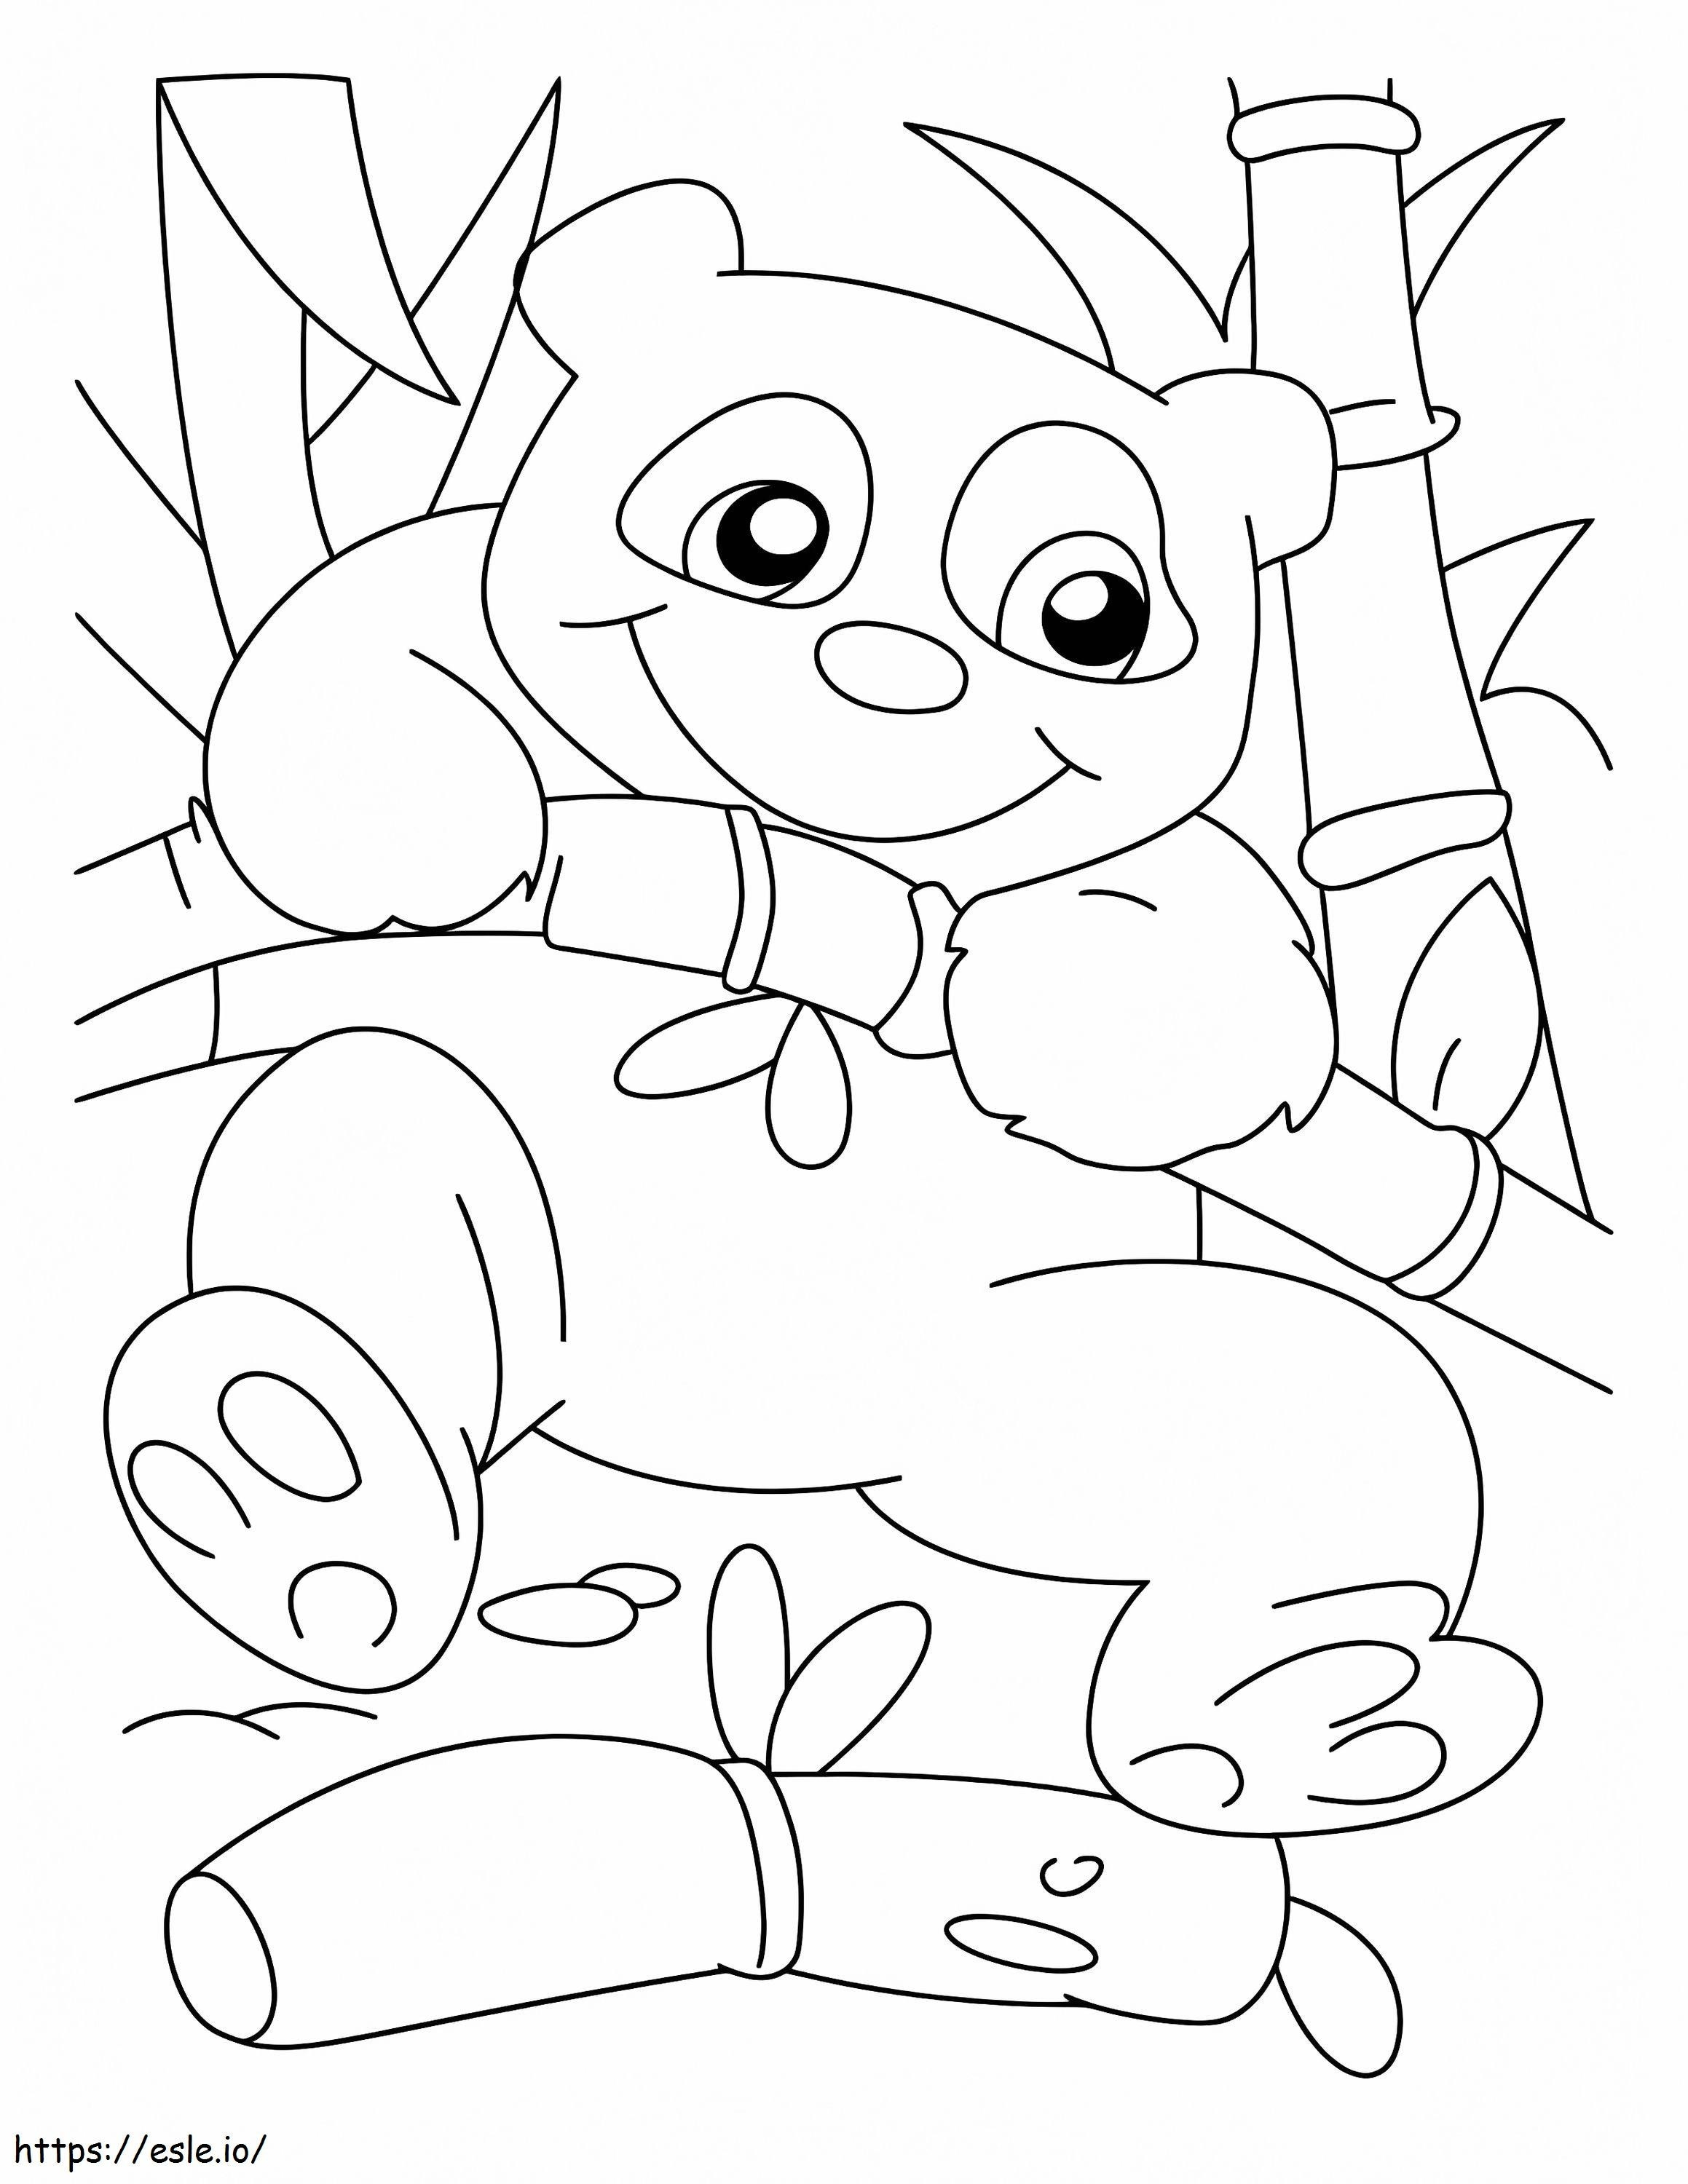 Lovely Panda coloring page